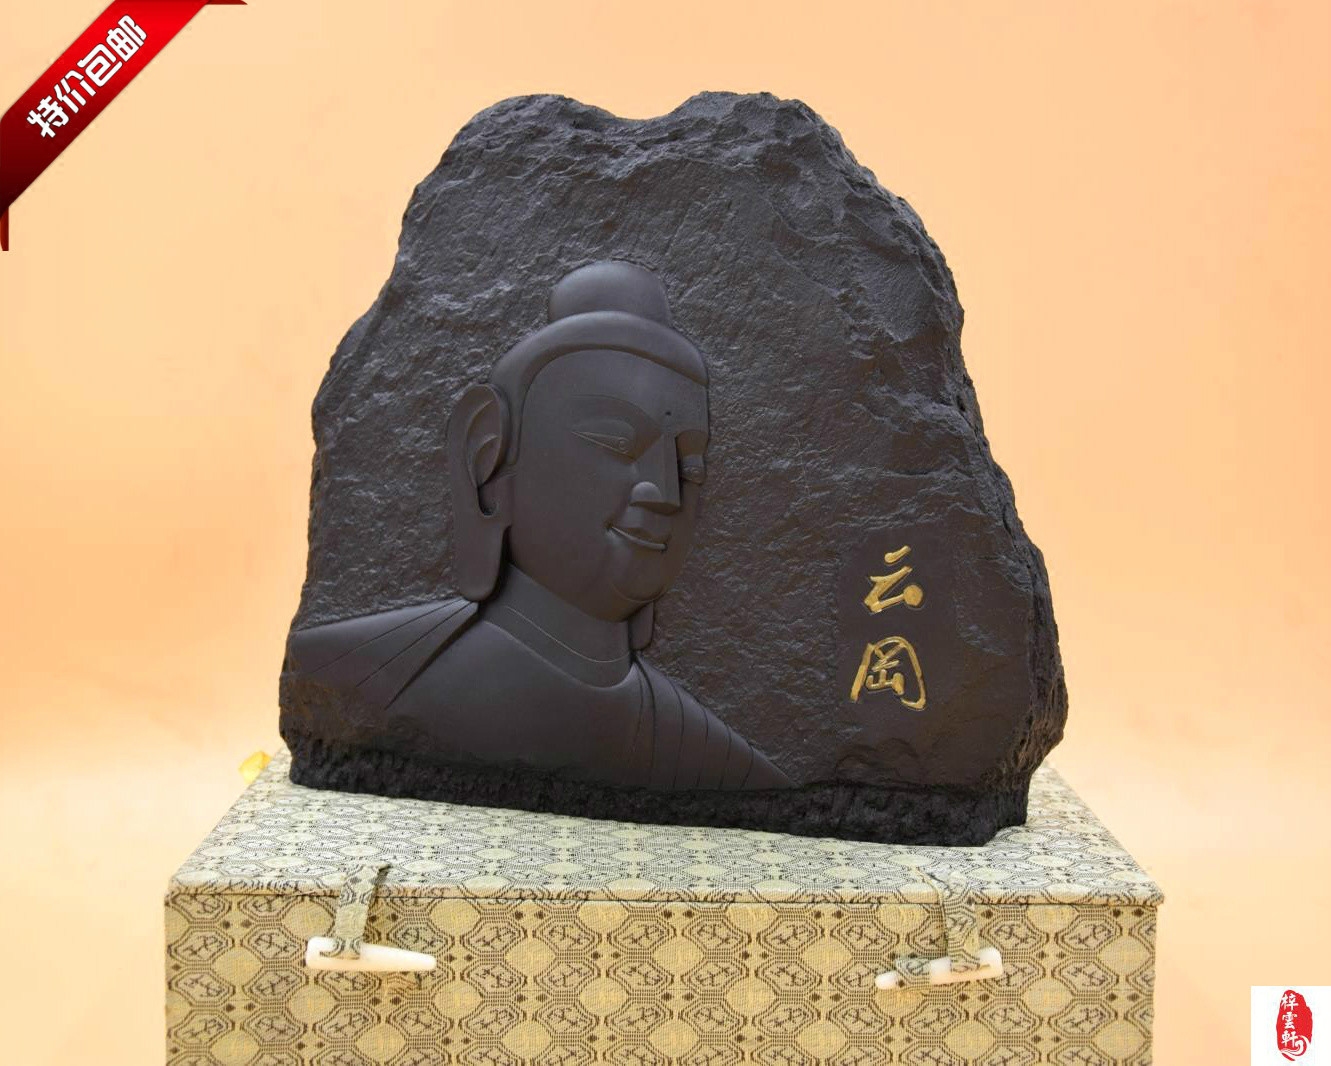 Yingchun boutique special Datong coal carving charcoal carving in addition to formaldehyde odor and radiation protection Home Office Yungang Buddha ornaments